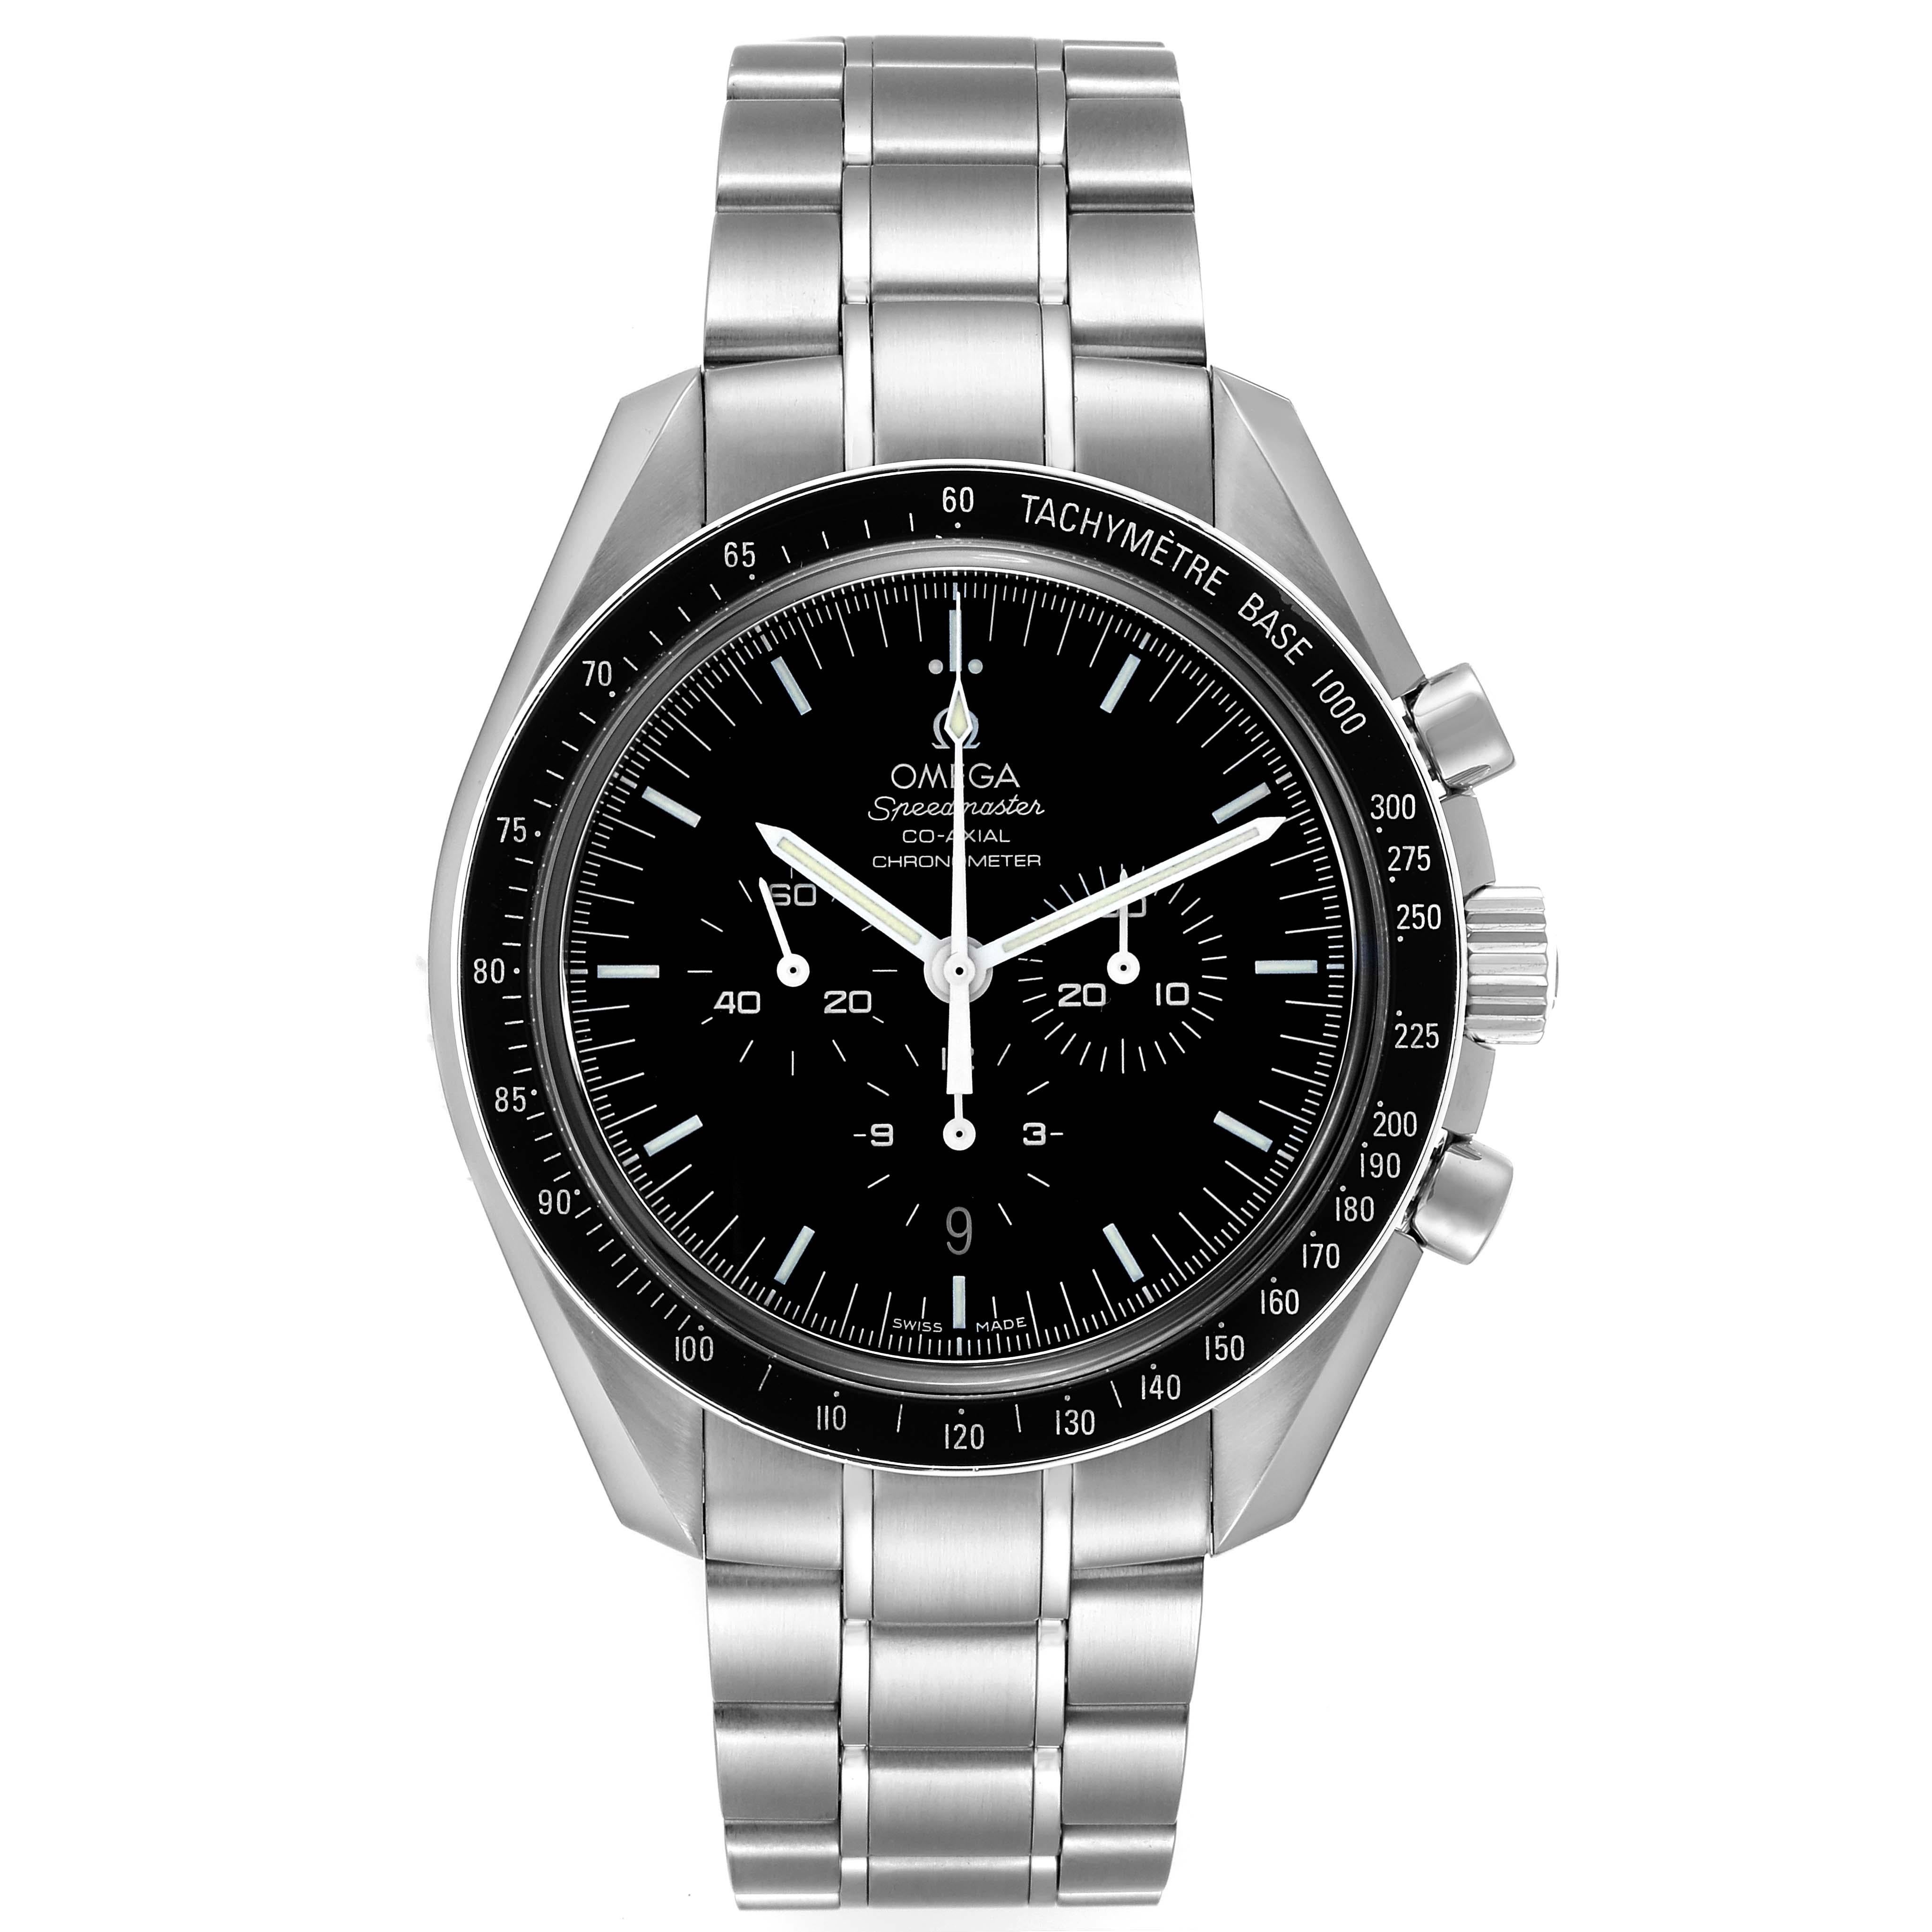 Omega Speedmaster Moonwatch Steel Mens Watch 311.30.44.50.01.001 Box Card. Automatic self-winding Co-Axial chronograph movement. Stainless steel round case 44.25 mm in diameter. Transparent exhibition sapphire crystal caseback. Numbered caseback.